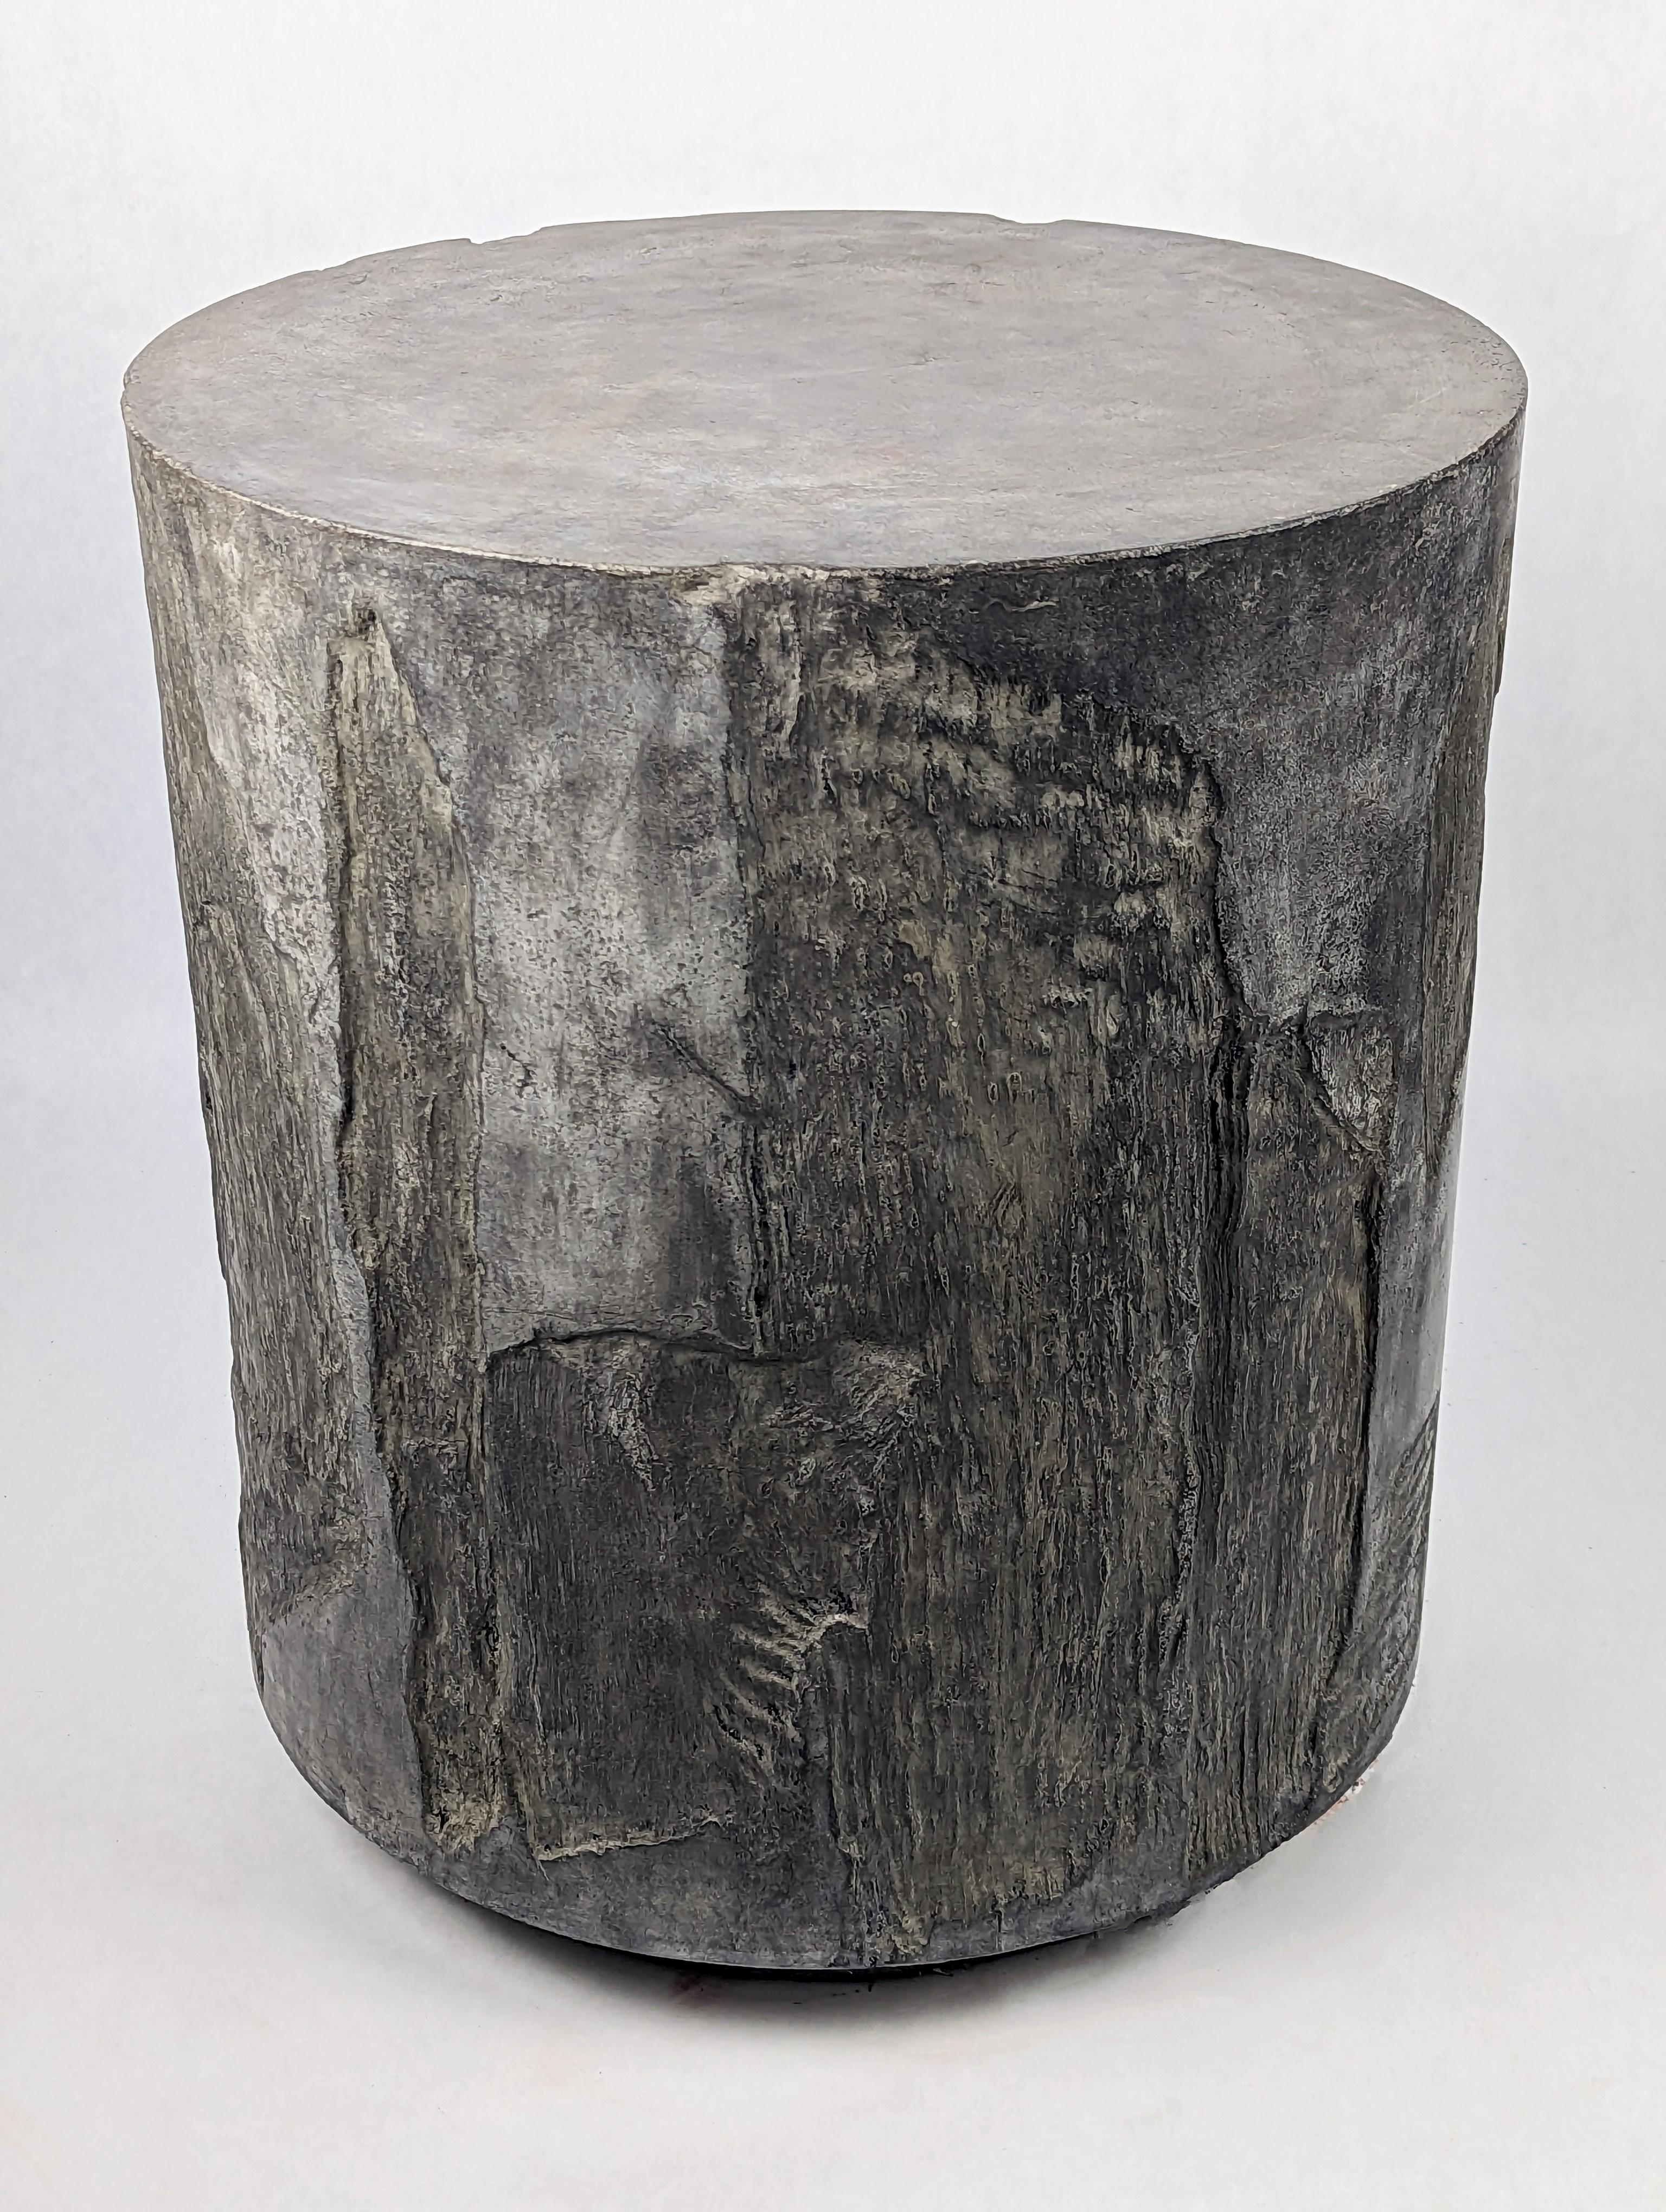 Dark gray, artistic concrete side table or stool with intricate, rock-like patterns on the sides from impressions of paper bark, a tree from Australia. This unique and rustic work would fare well in a modern alcove or a slightly unkempt garden